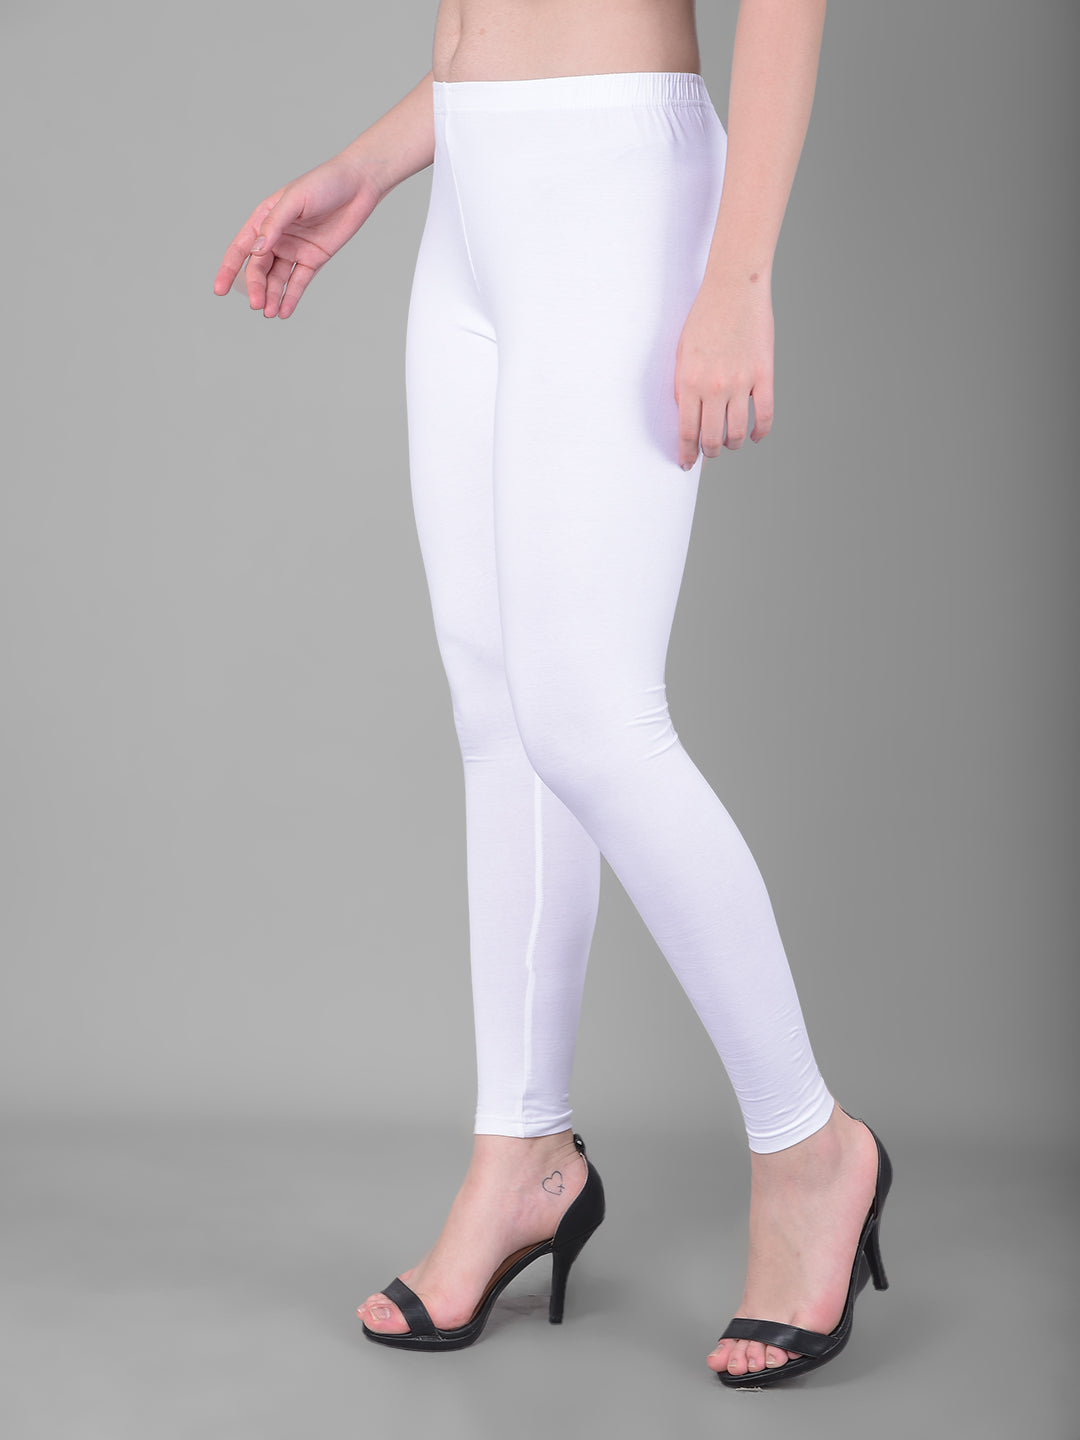 Plain Ladies Short Legging, Size: Large at Rs 165 in Lucknow